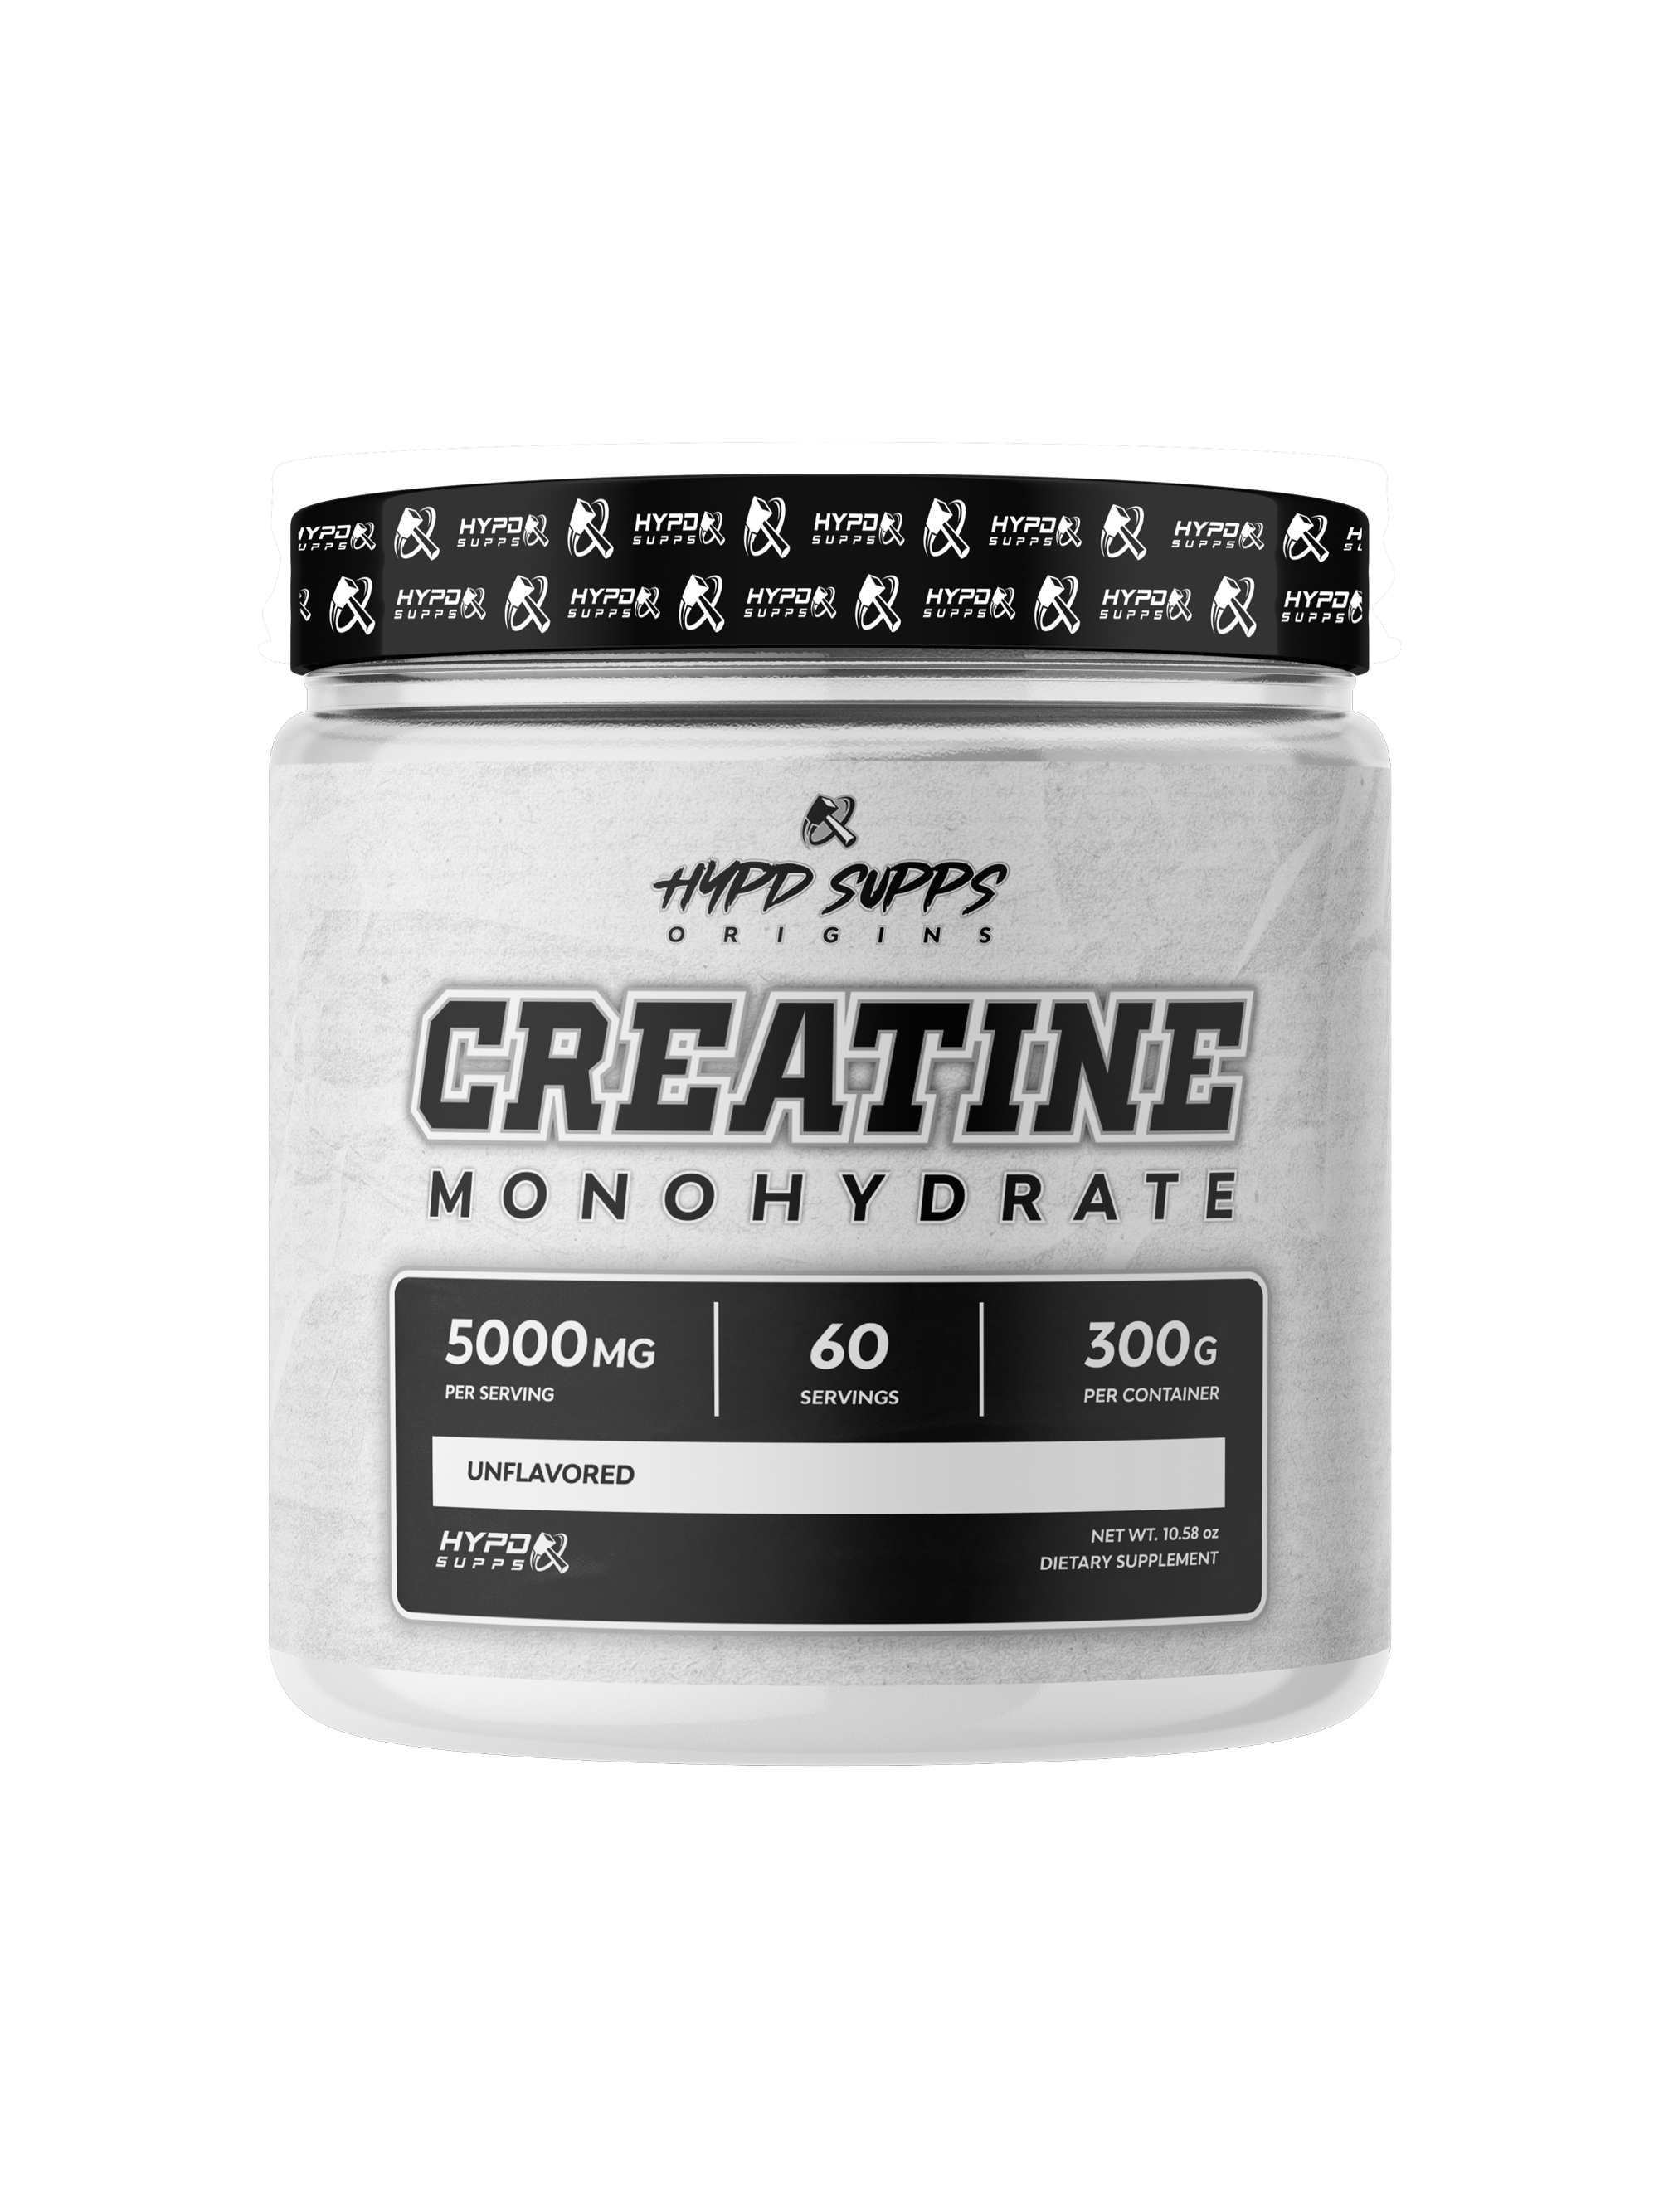 https://hypdsupps.com/wp-content/uploads/2022/07/Creatine-20cc-FRONT.png